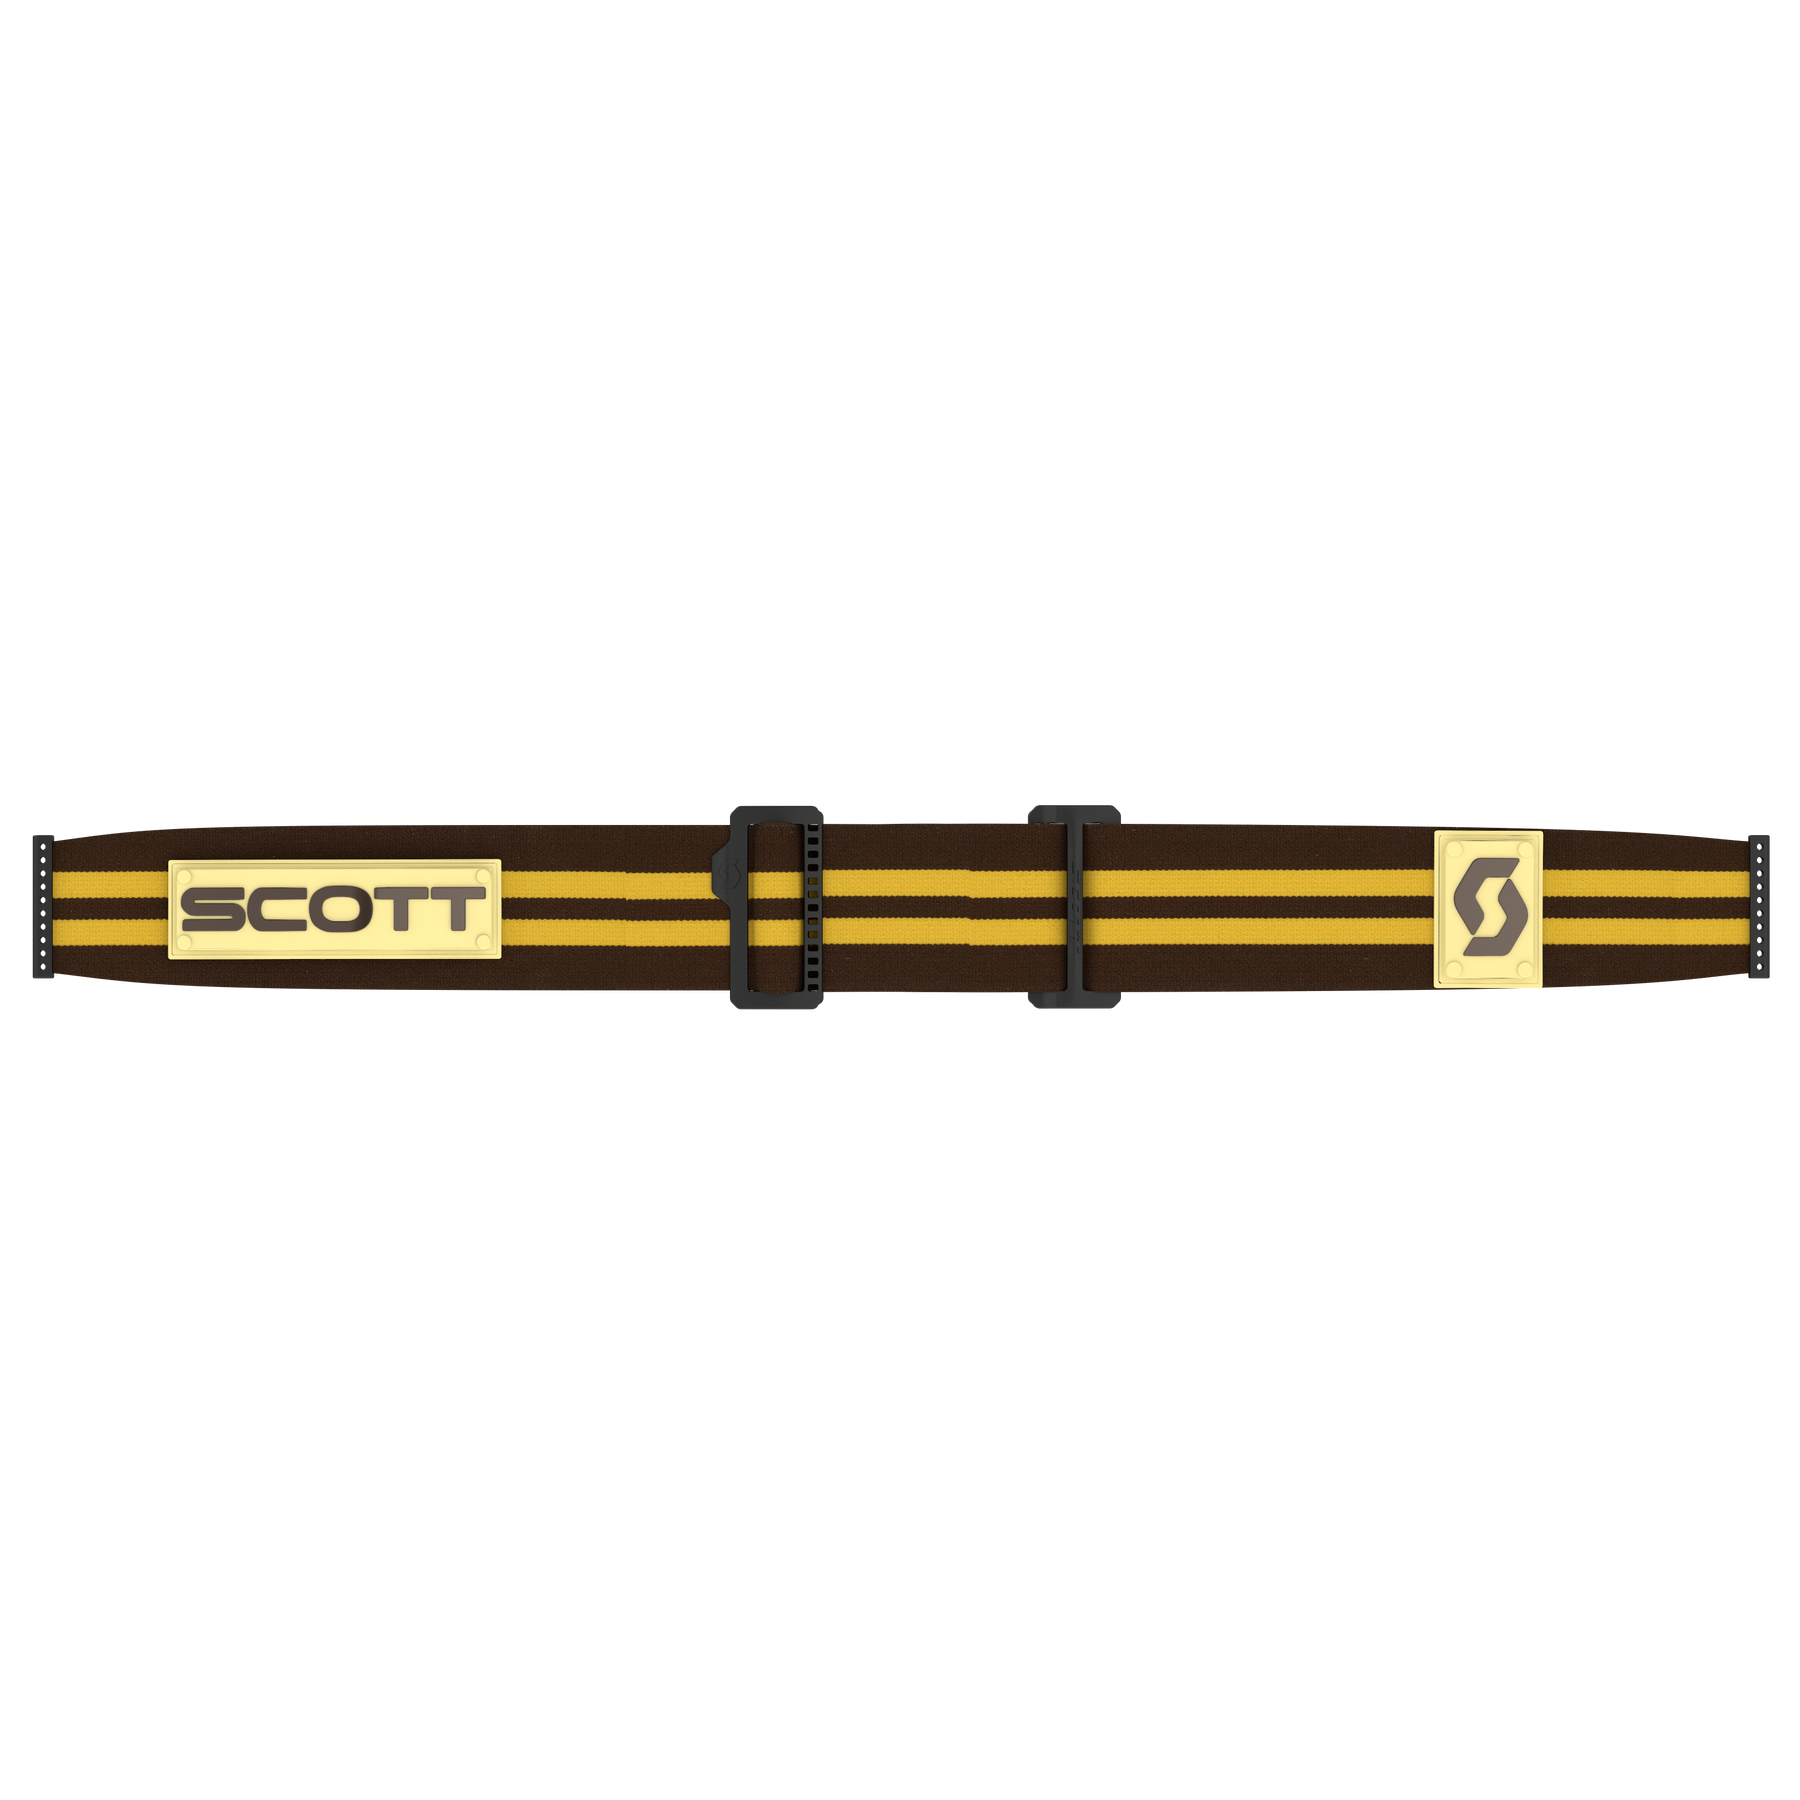 Scott Goggle 89X Era Brown with Silver Lens